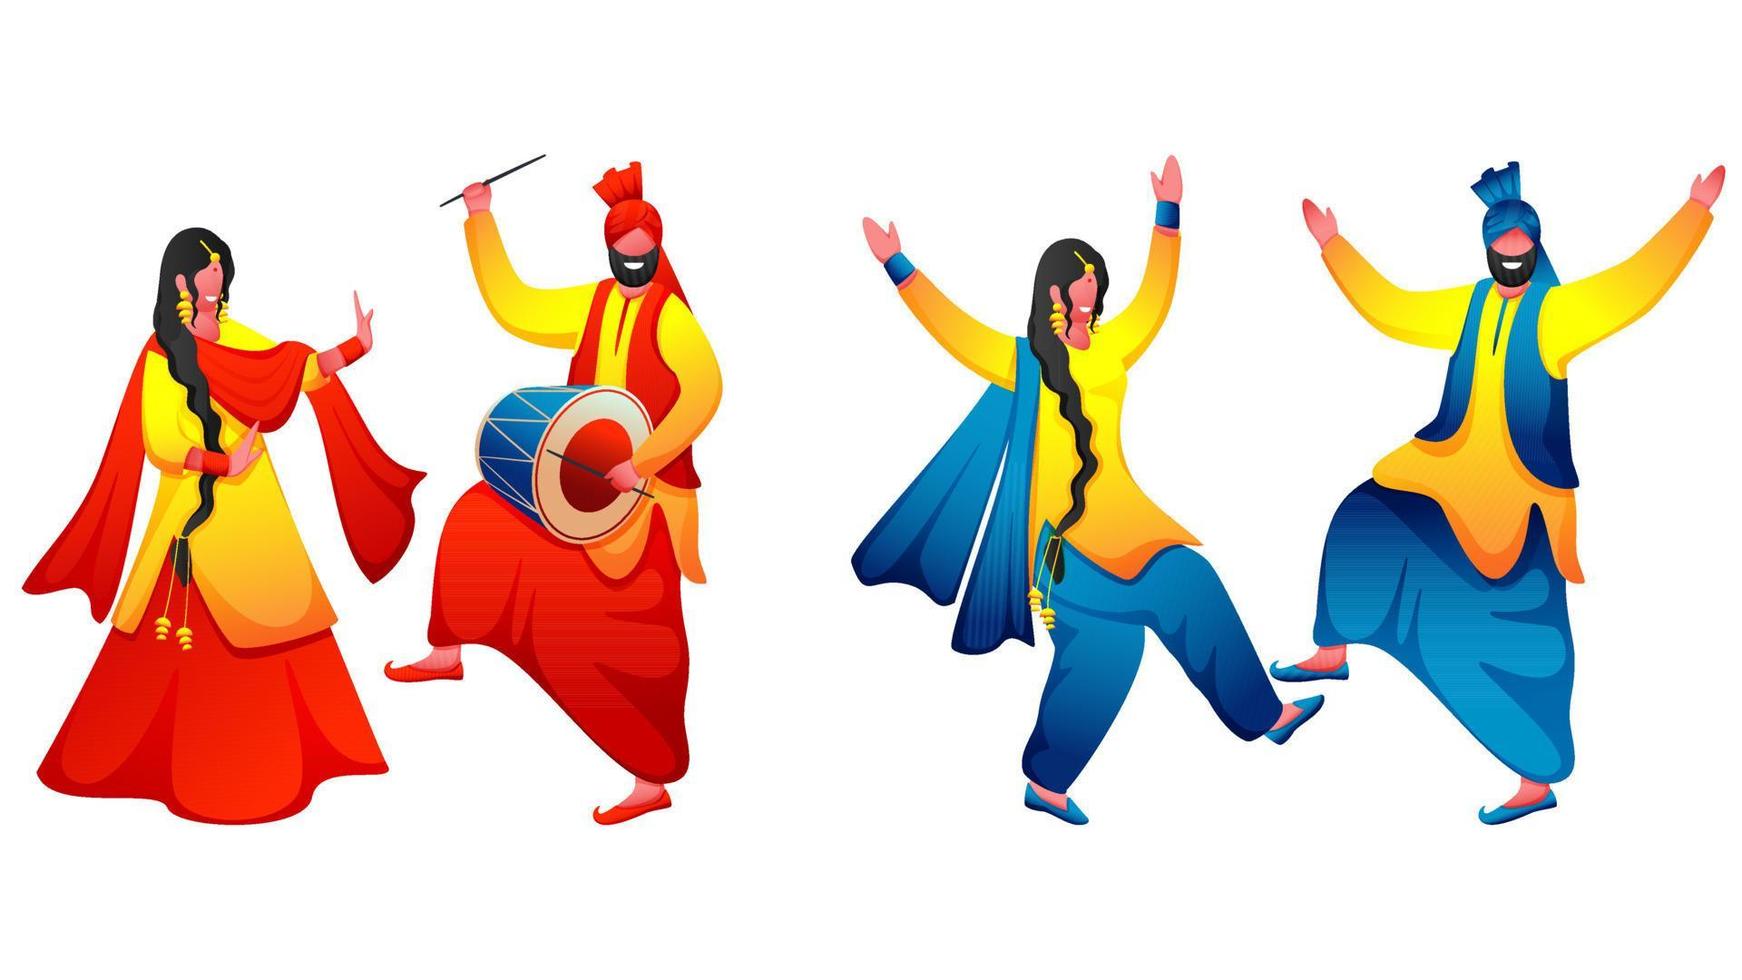 Two Images Of Punjabi Couple Performing Bhangra Dance With Dhol Instrument On White Background vector